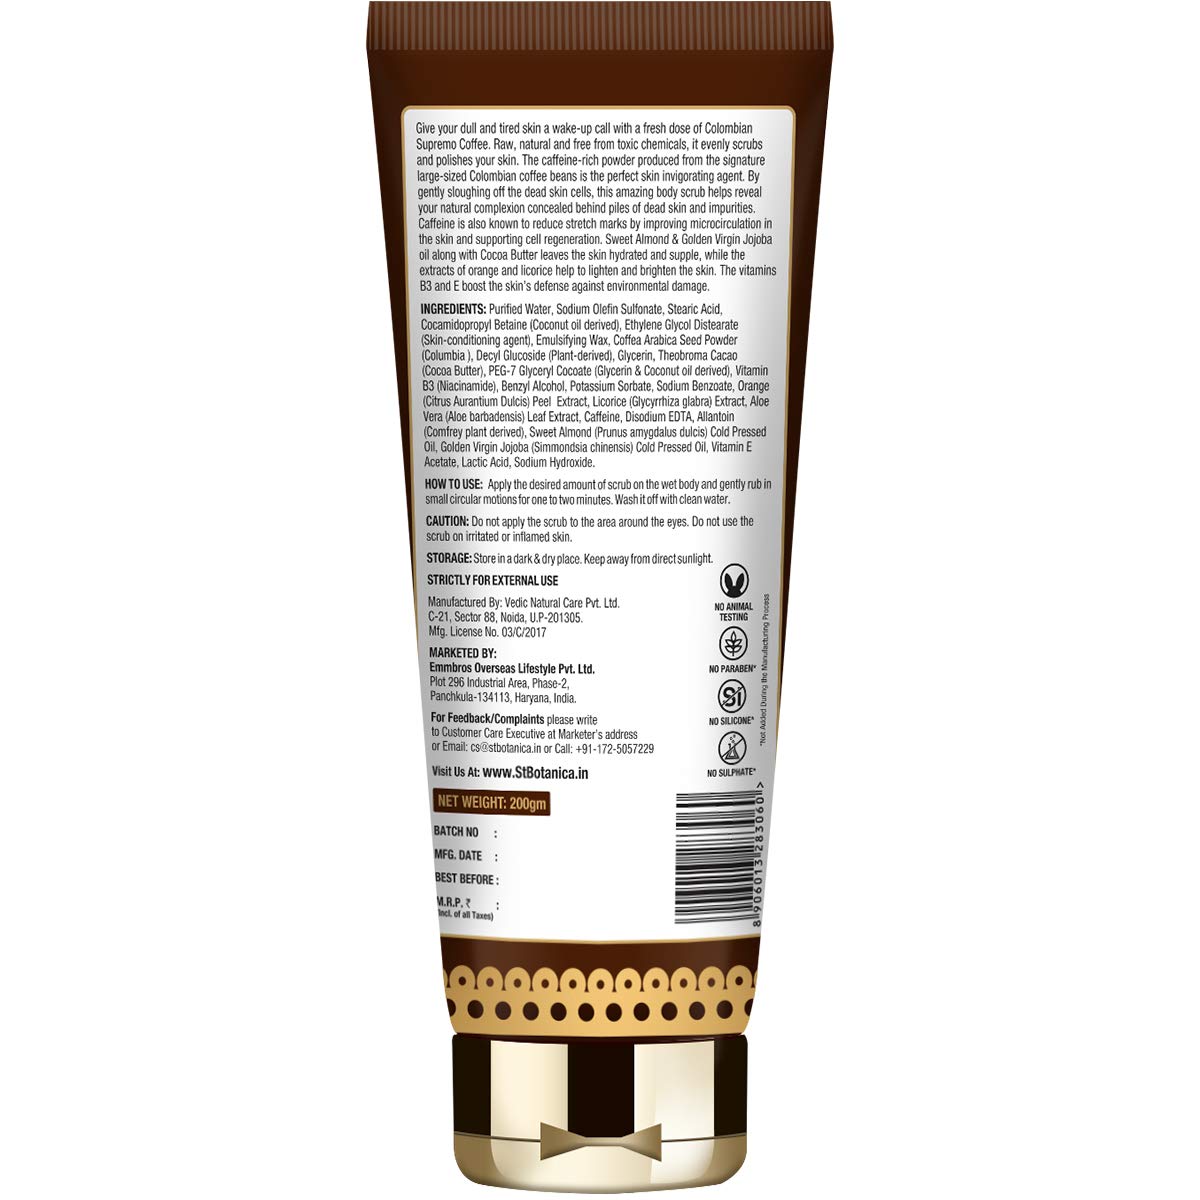 St.Botanica Colombian Supremo Coffee Body Scrub With Coffee, Caffeine And Cocoa Butter No SLS, Paraben, 200 ml (STBOT700)